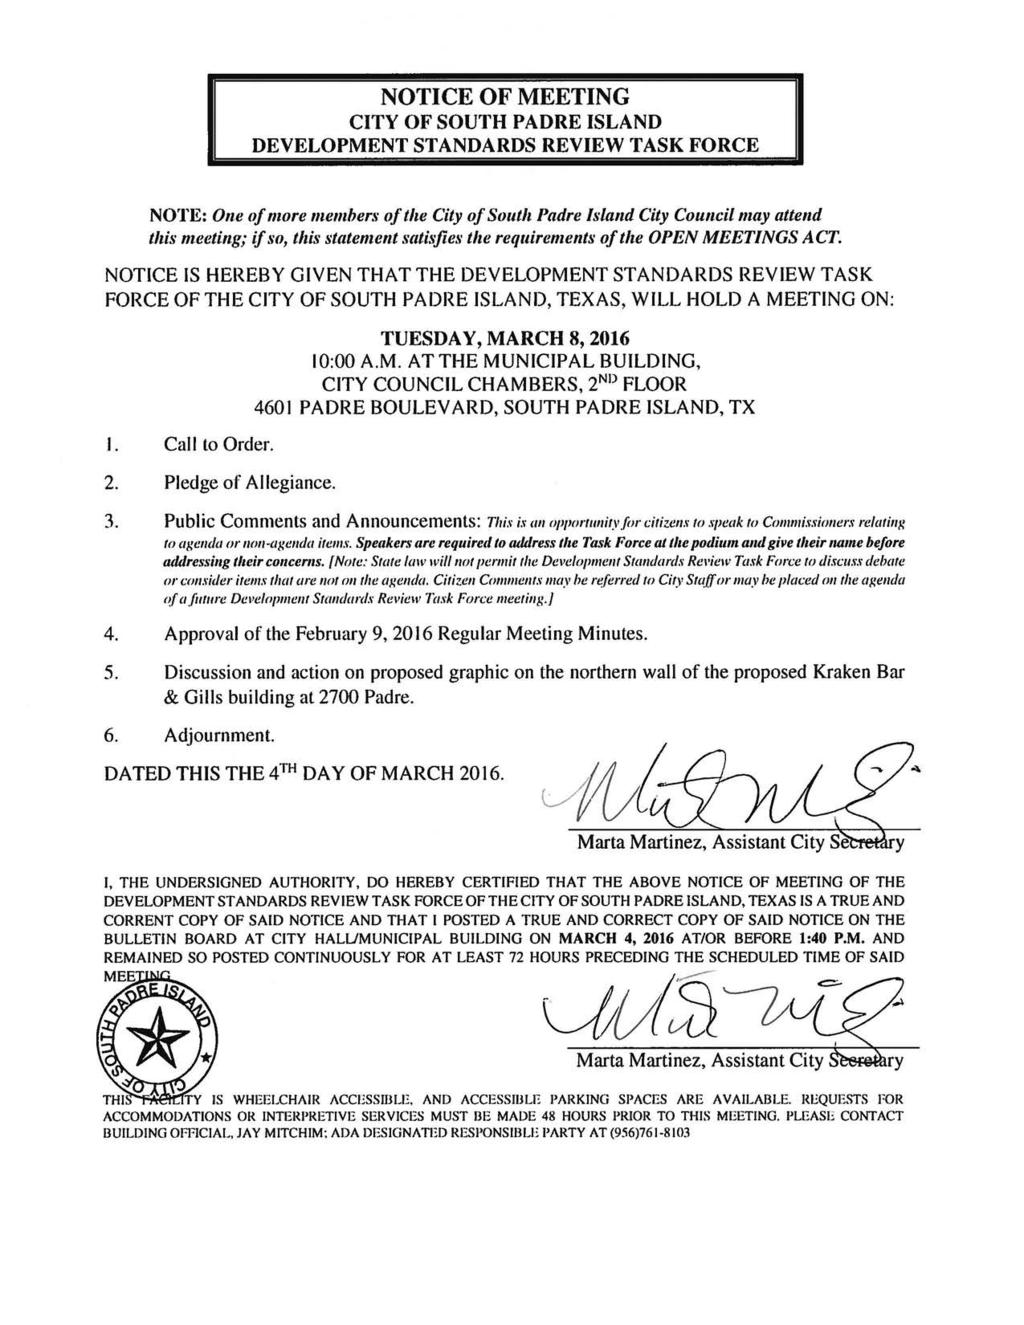 NOTICE OF MEETING CITY OF SOUTH PADRE ISLAND DEVELOPMENT STANDARDS REVIEW TASK FORCE NOTE: One of more members of the City of South Padre Island City Council may attend this meeting; if so, this